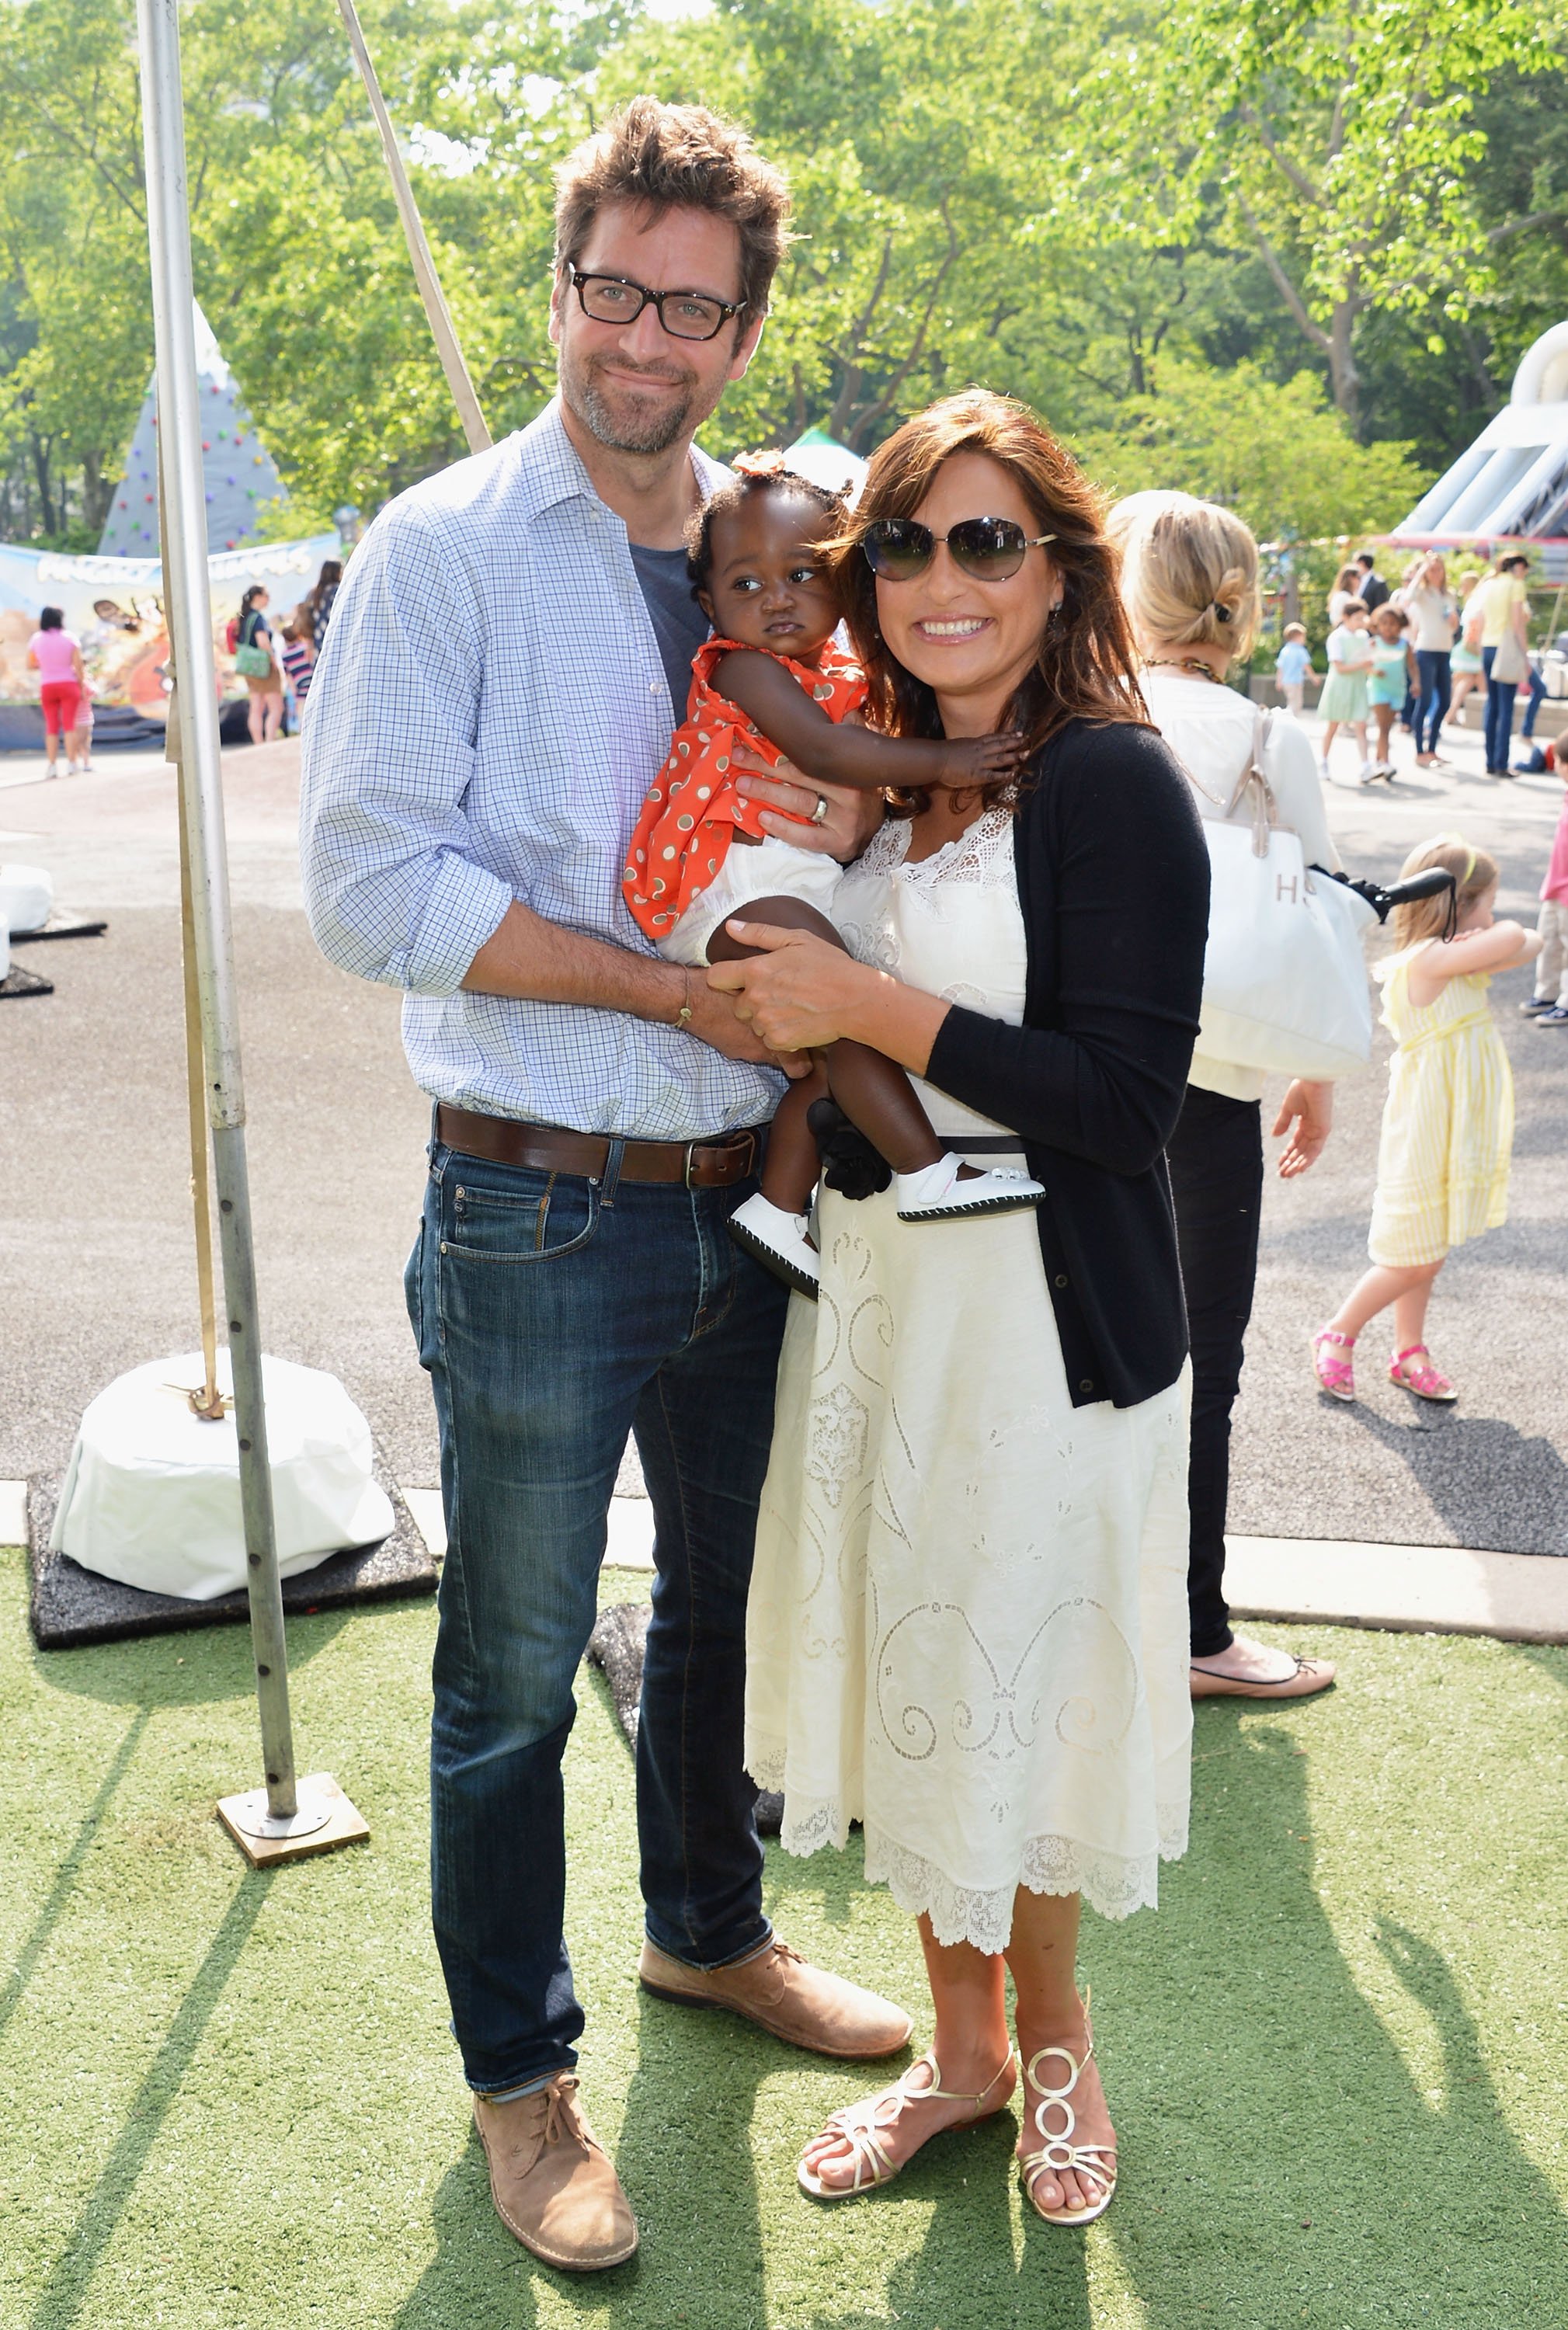  Peter Hermann and Mariska Hargitay with their daughter, Amaya at the 20th Annual Playground Partners Family Party at Central Park, Heckscher Softball Fields on May 23, 2012. | Source: Getty Images